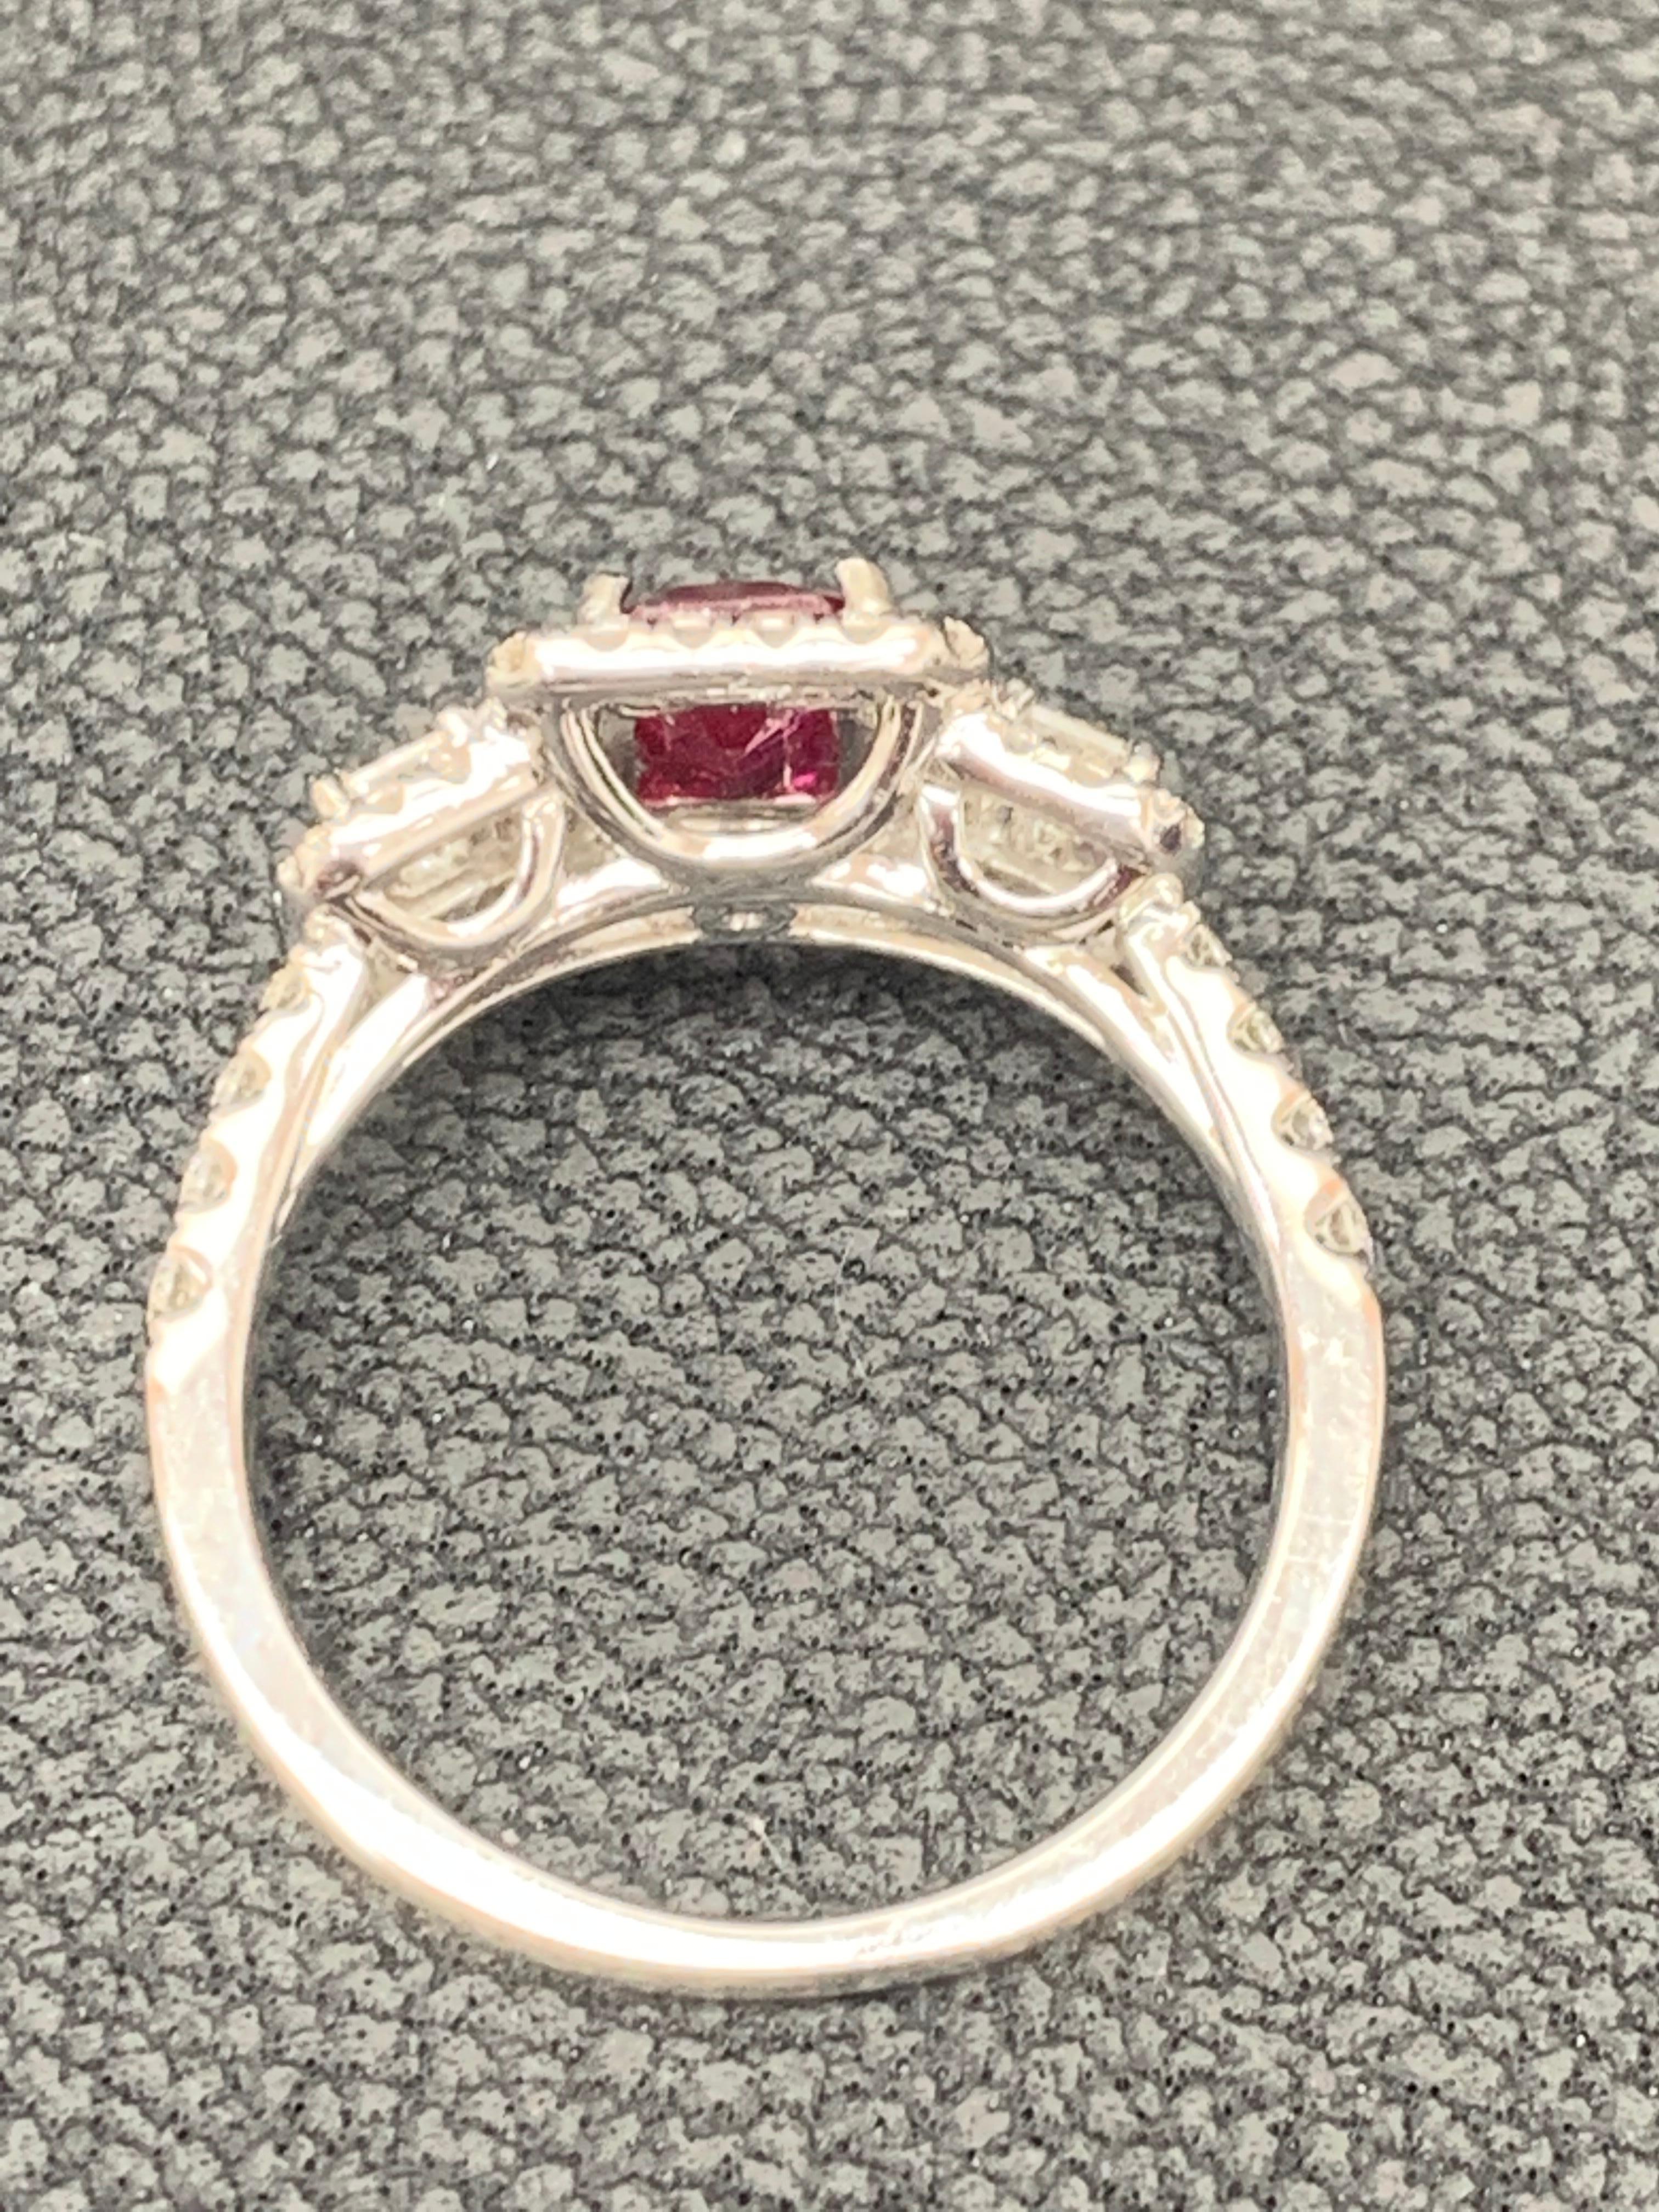 0.85 Carat Emerald Cut Ruby Diamond Engagement Ring in 18K White Gold For Sale 4